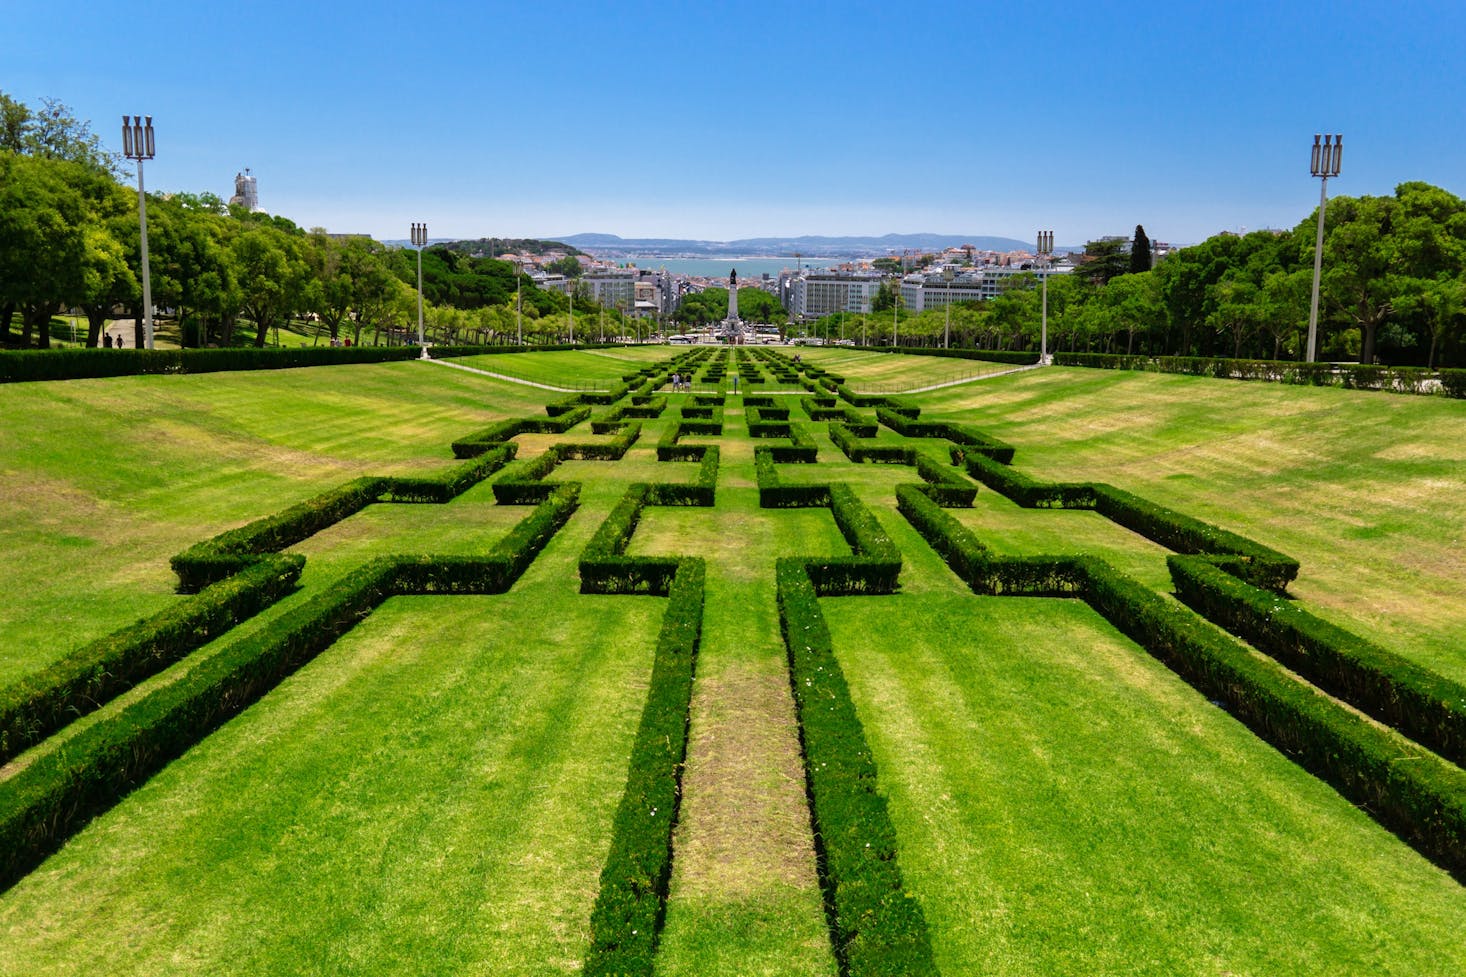 A large park in Lisbon with long maze-style hedges and a monument in the background